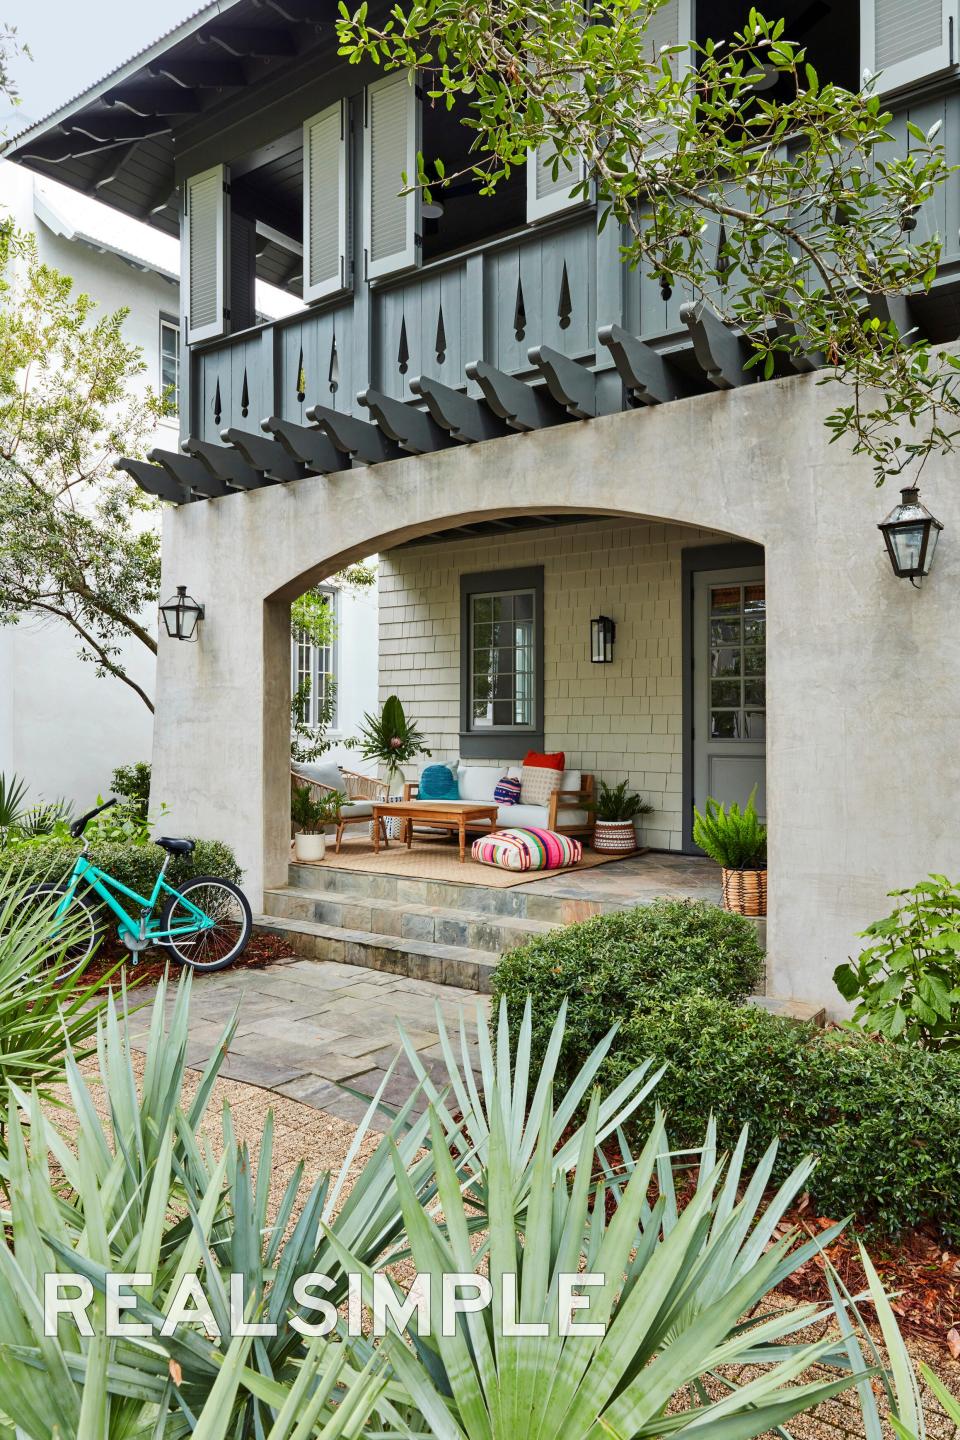 Real Simple magazine's 2022 home at Rosemary Beach will be open for tours Sept. 16 to 18. It can also be toured online in a 360VR video at RealSimple.com.